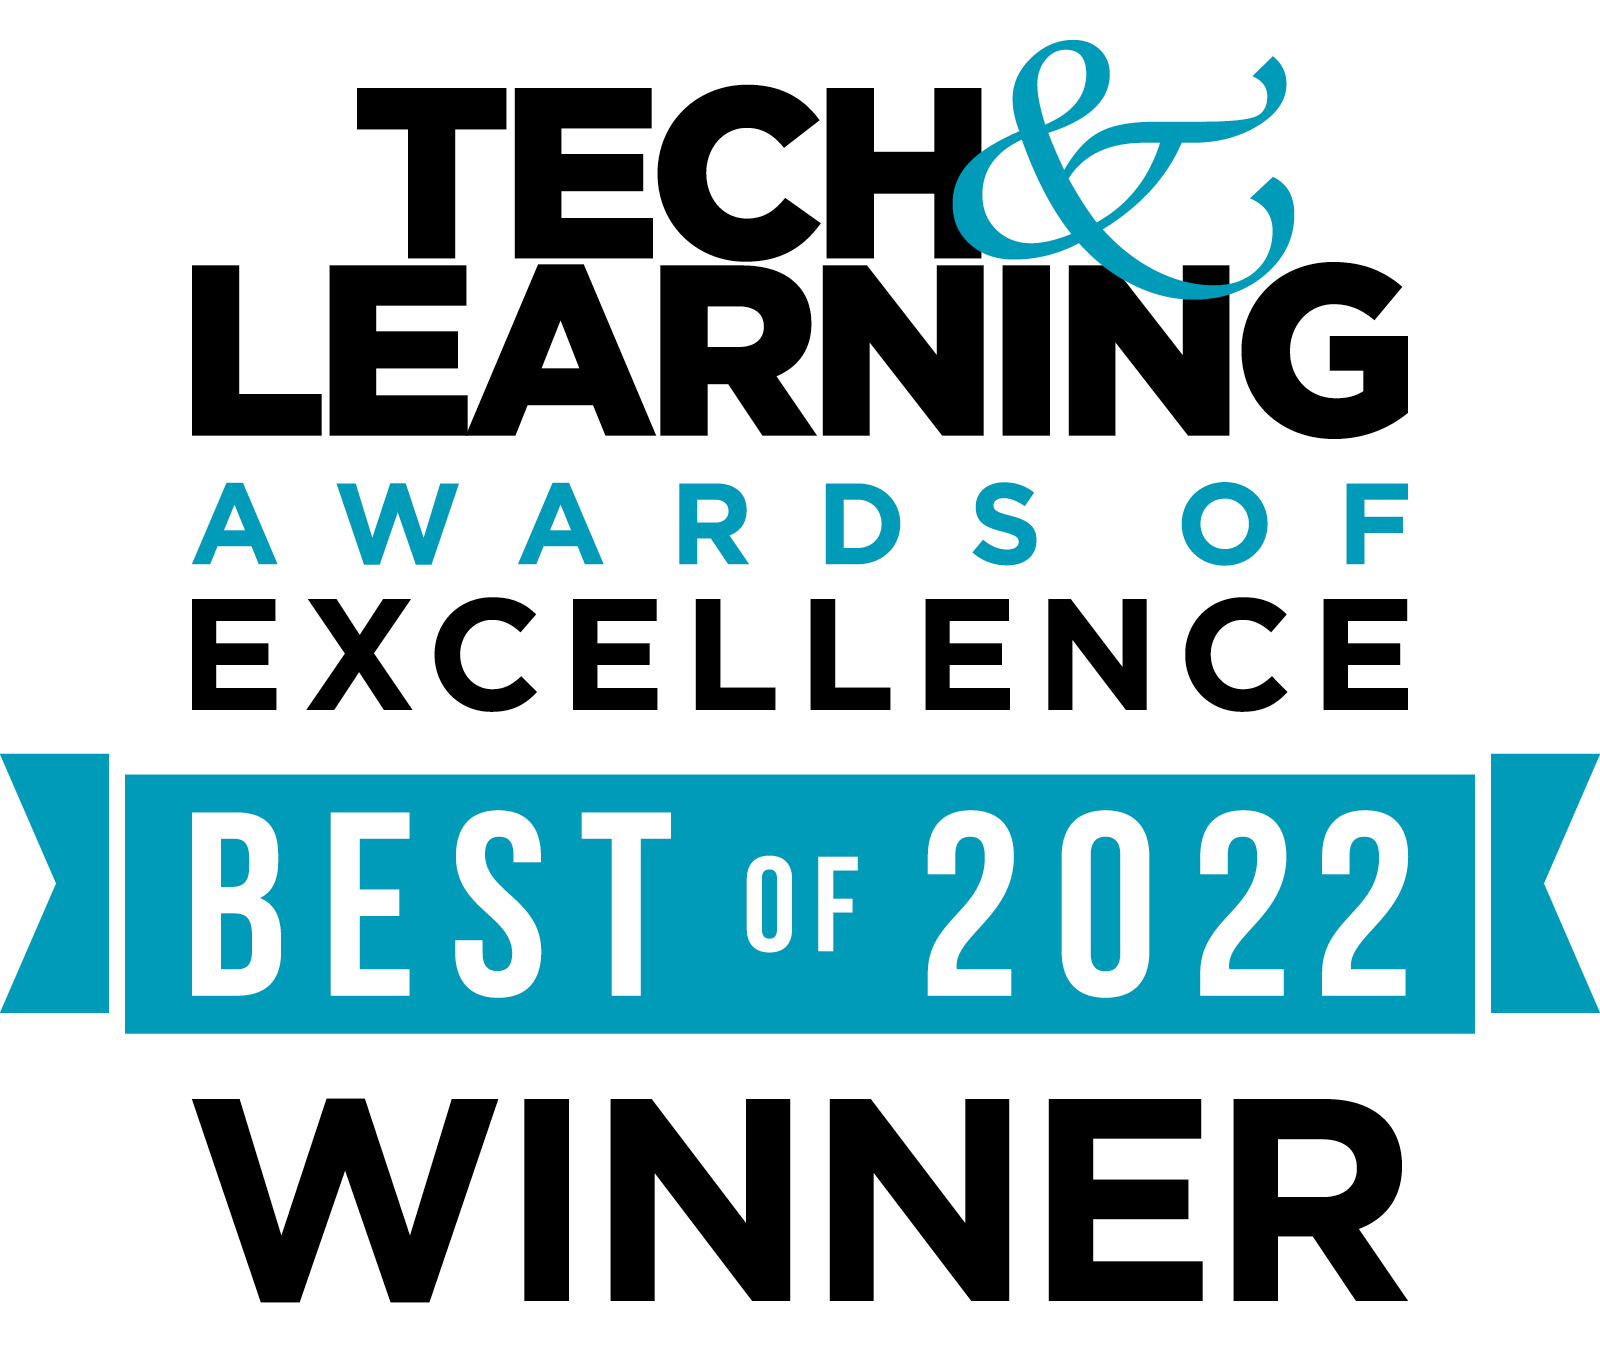 Tech and learning Awards of Excellence best of 2022 winner